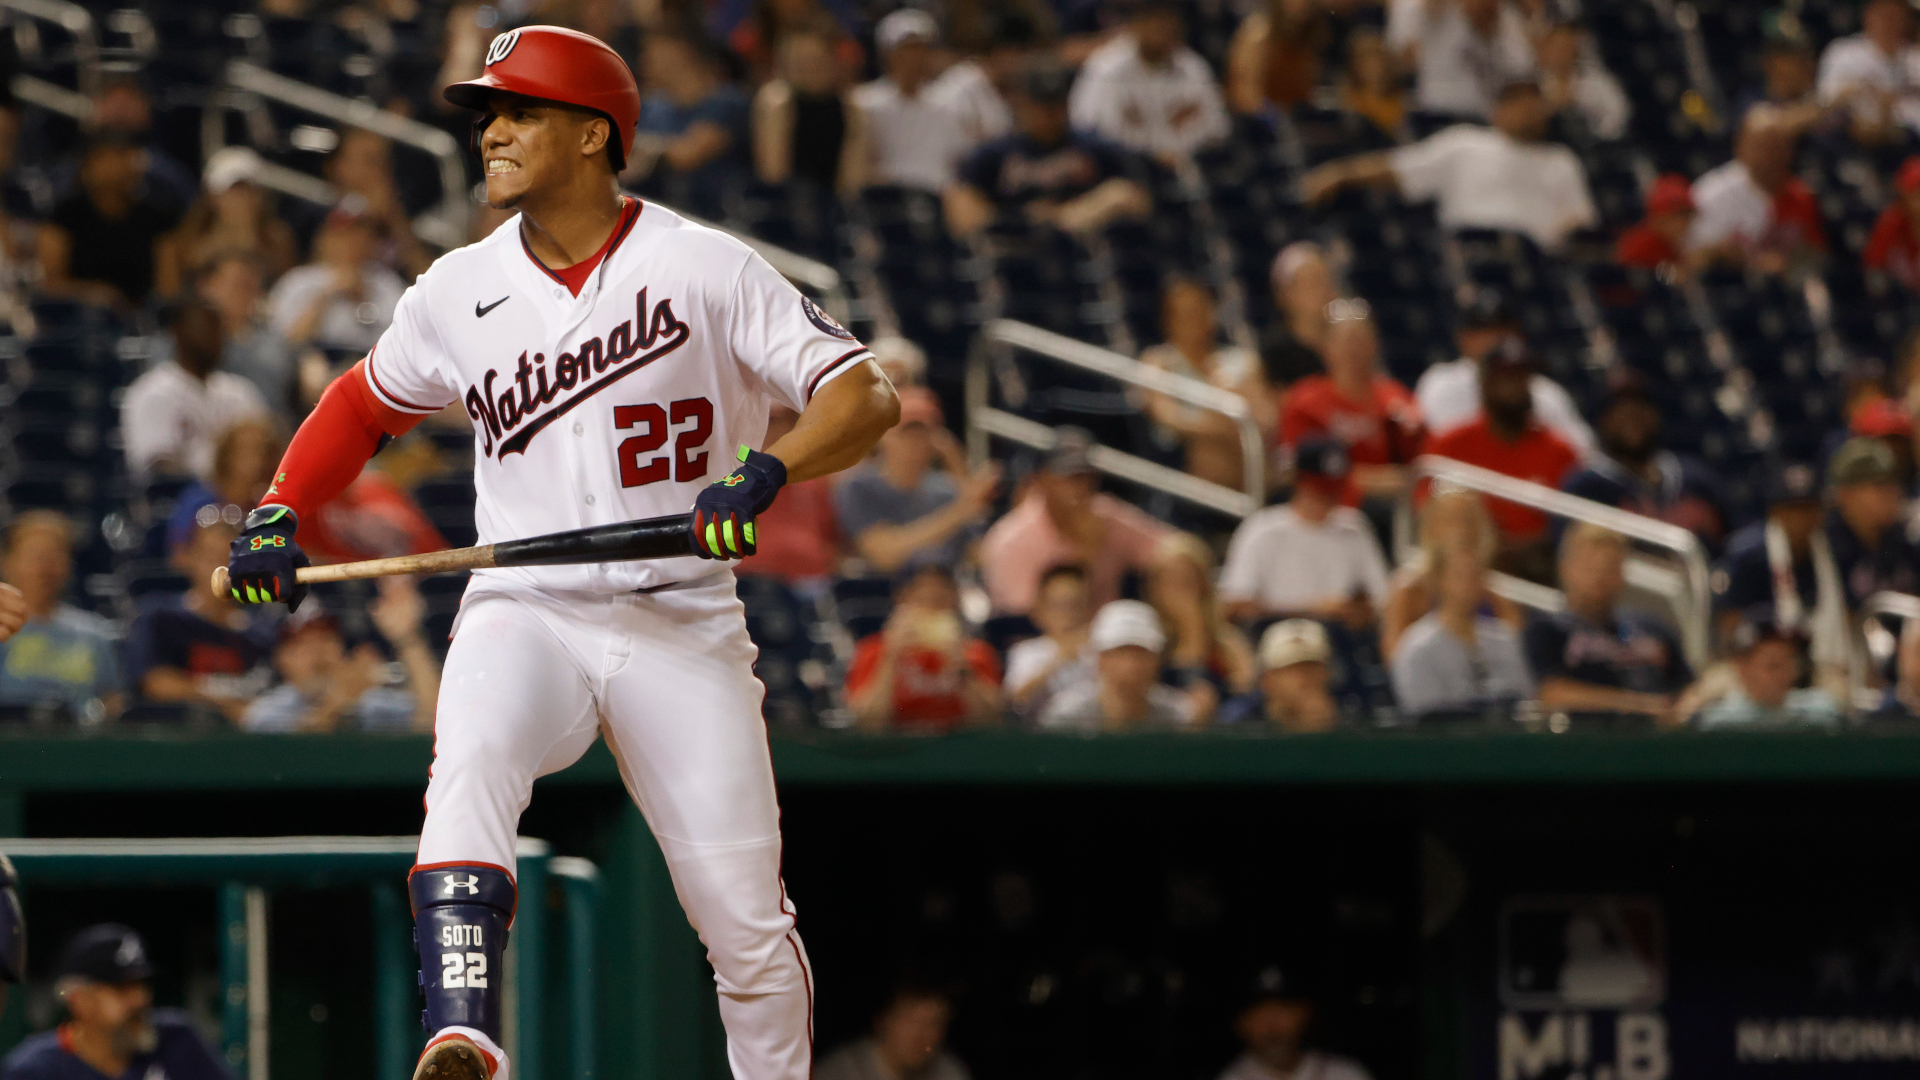 Juan Soto reacts after striking out against the Braves